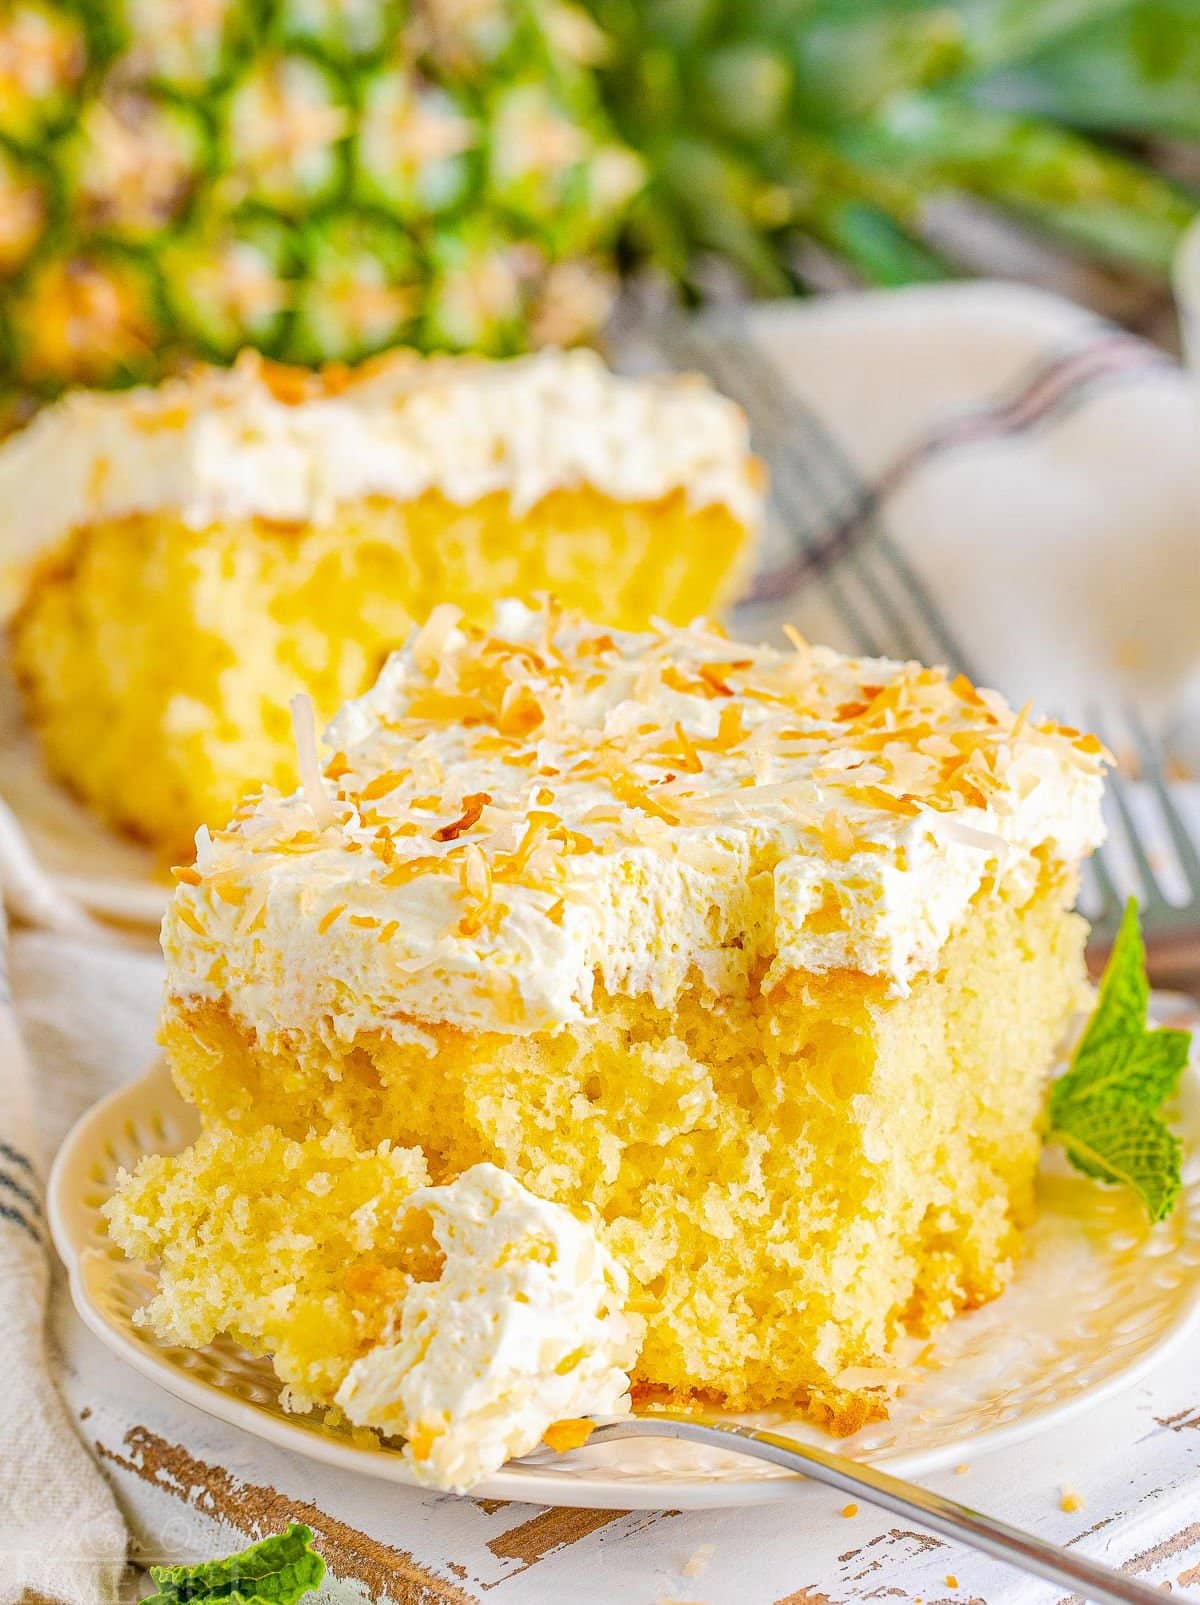 piece of pina colada poke cake on a white plate with a forkful of cake removed and sitting on edge of plate. another piece of cake and a whole pineapple can be seen in the background.